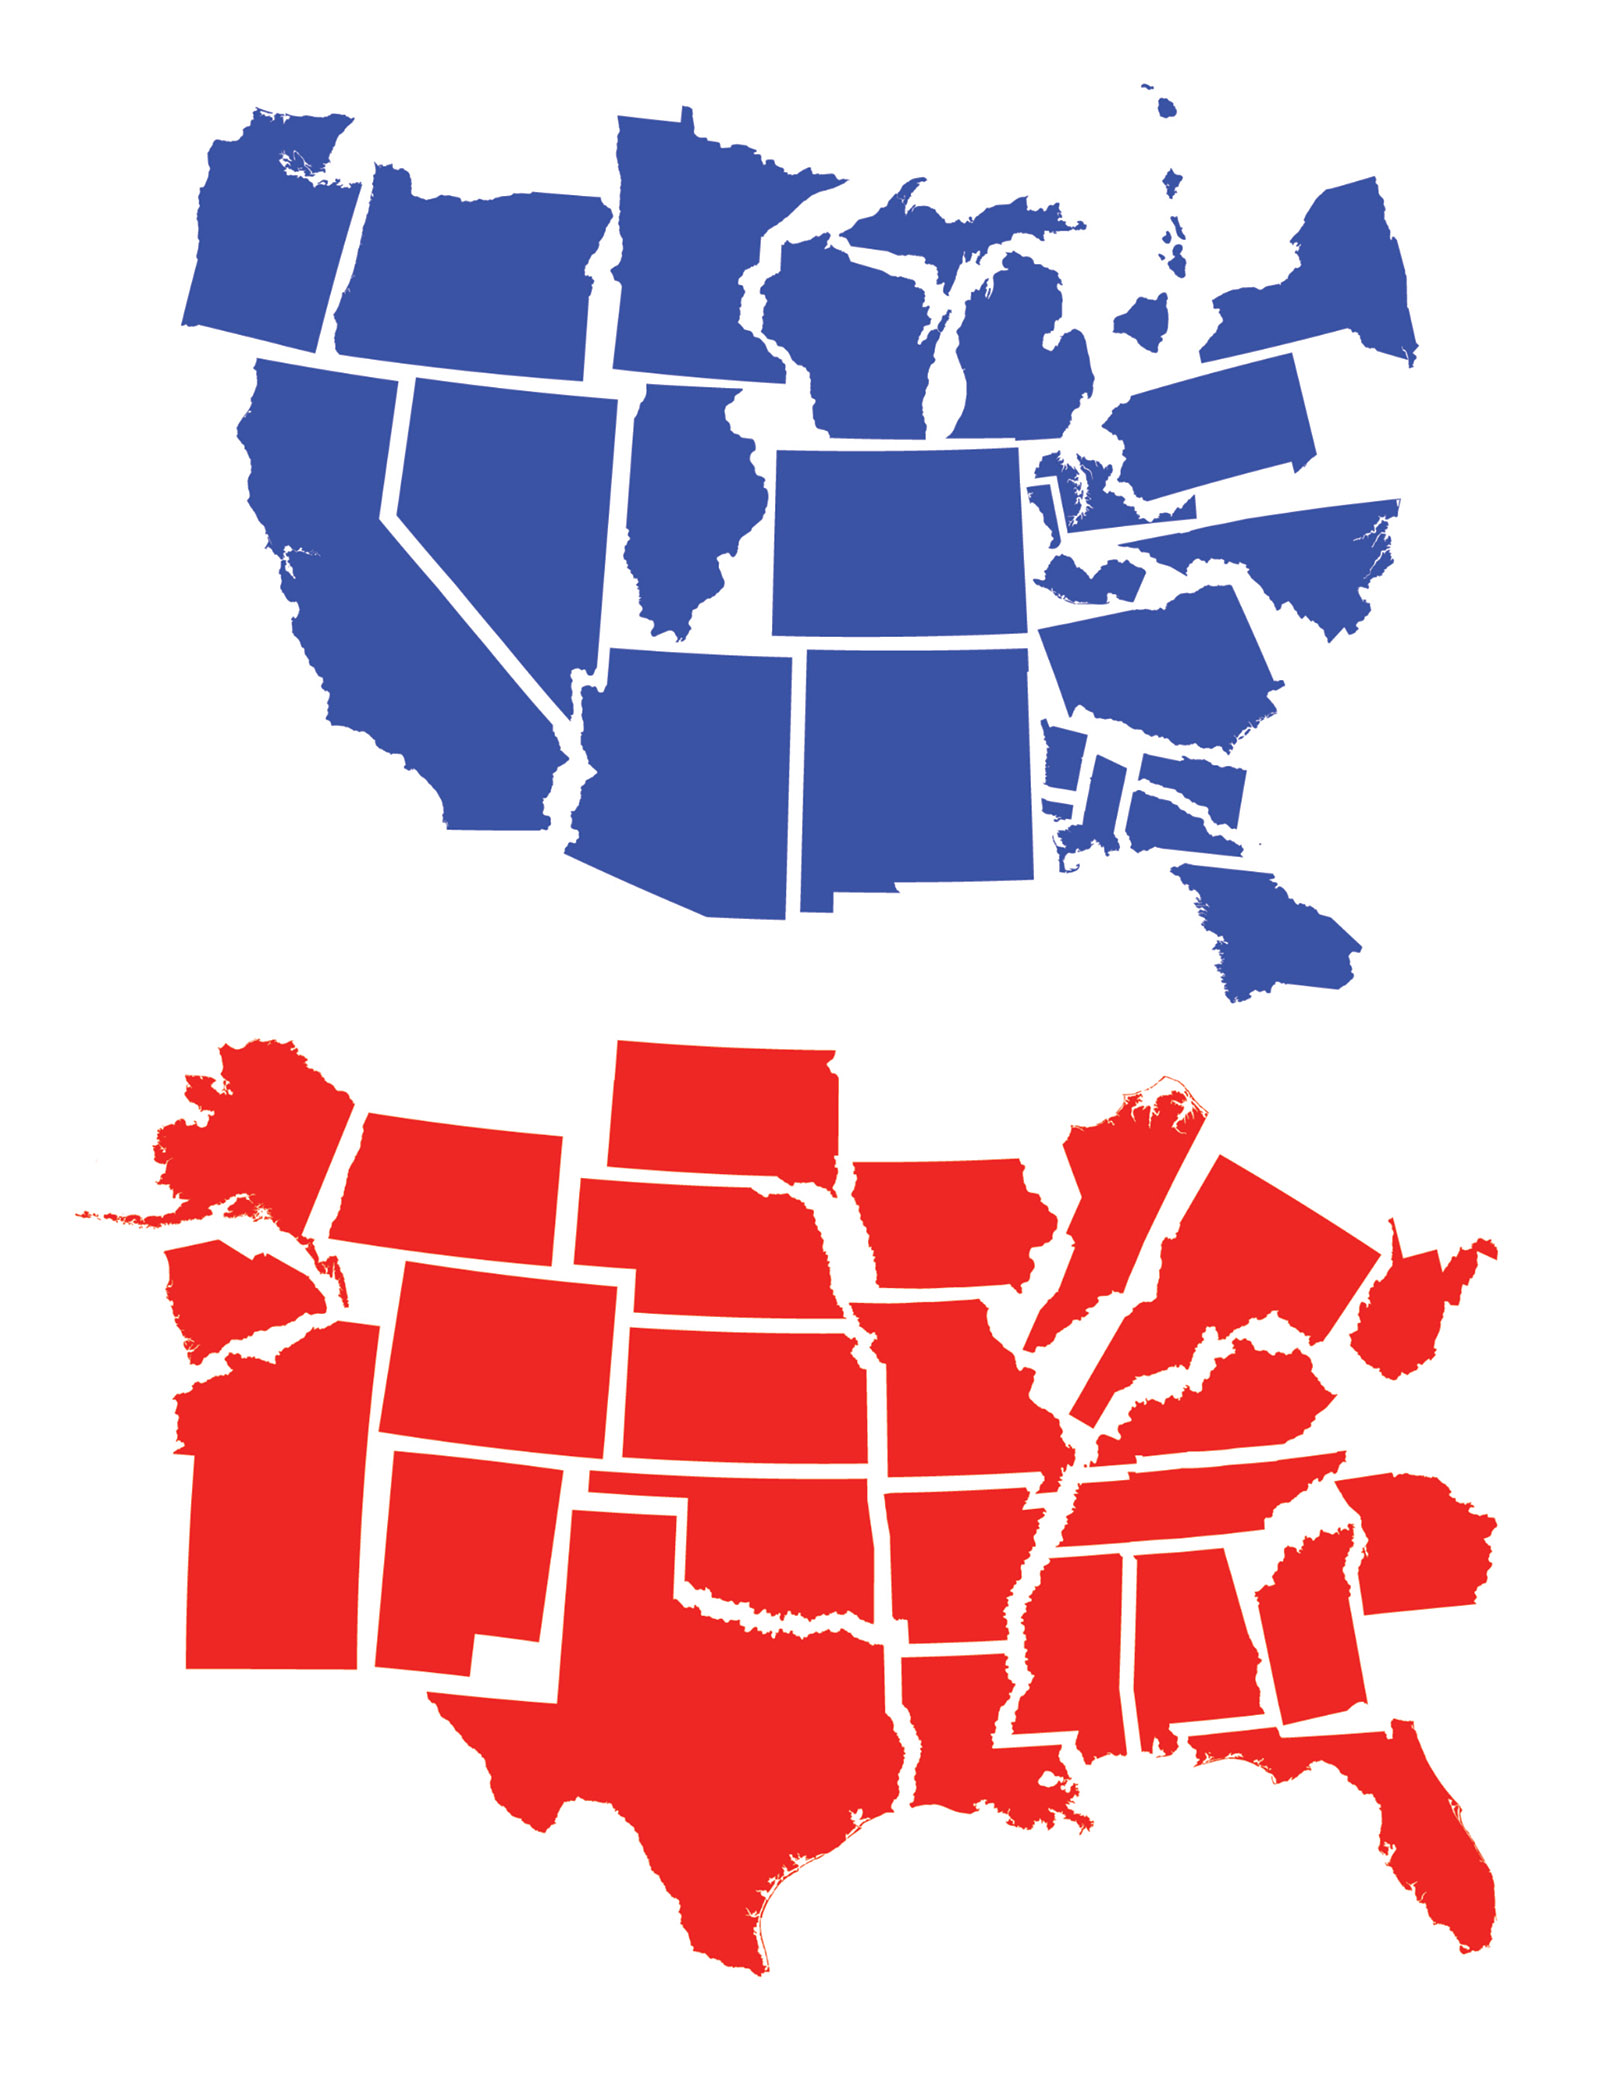 illustration of separated blue and red states in the US